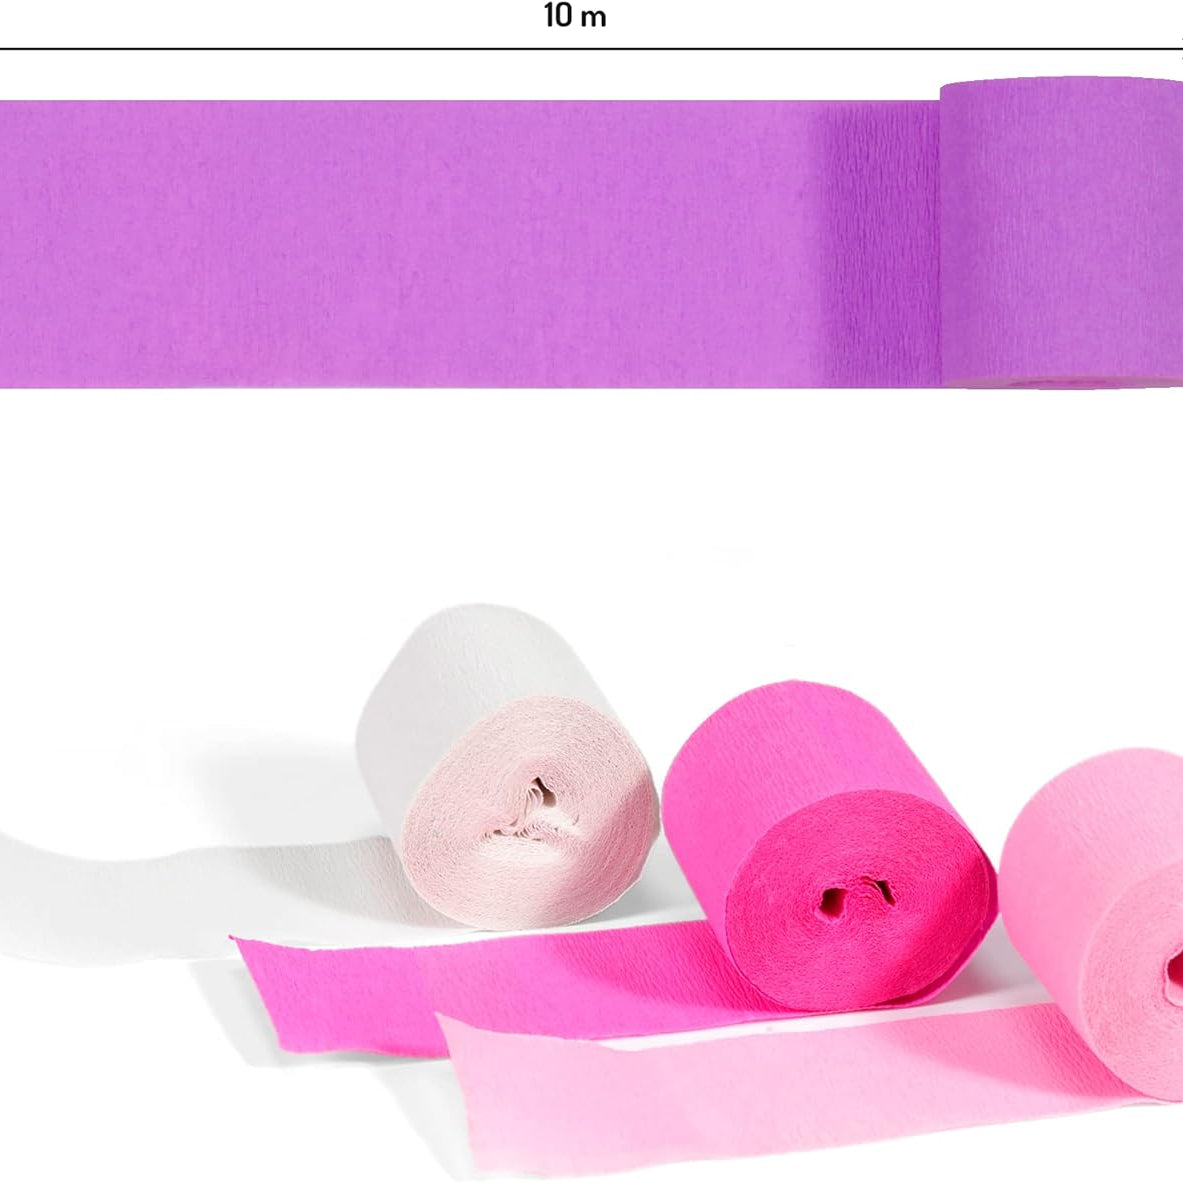 CLAIREFONTAINE Crepe Paper Strips 5cmx10M 4s Pink Assortment